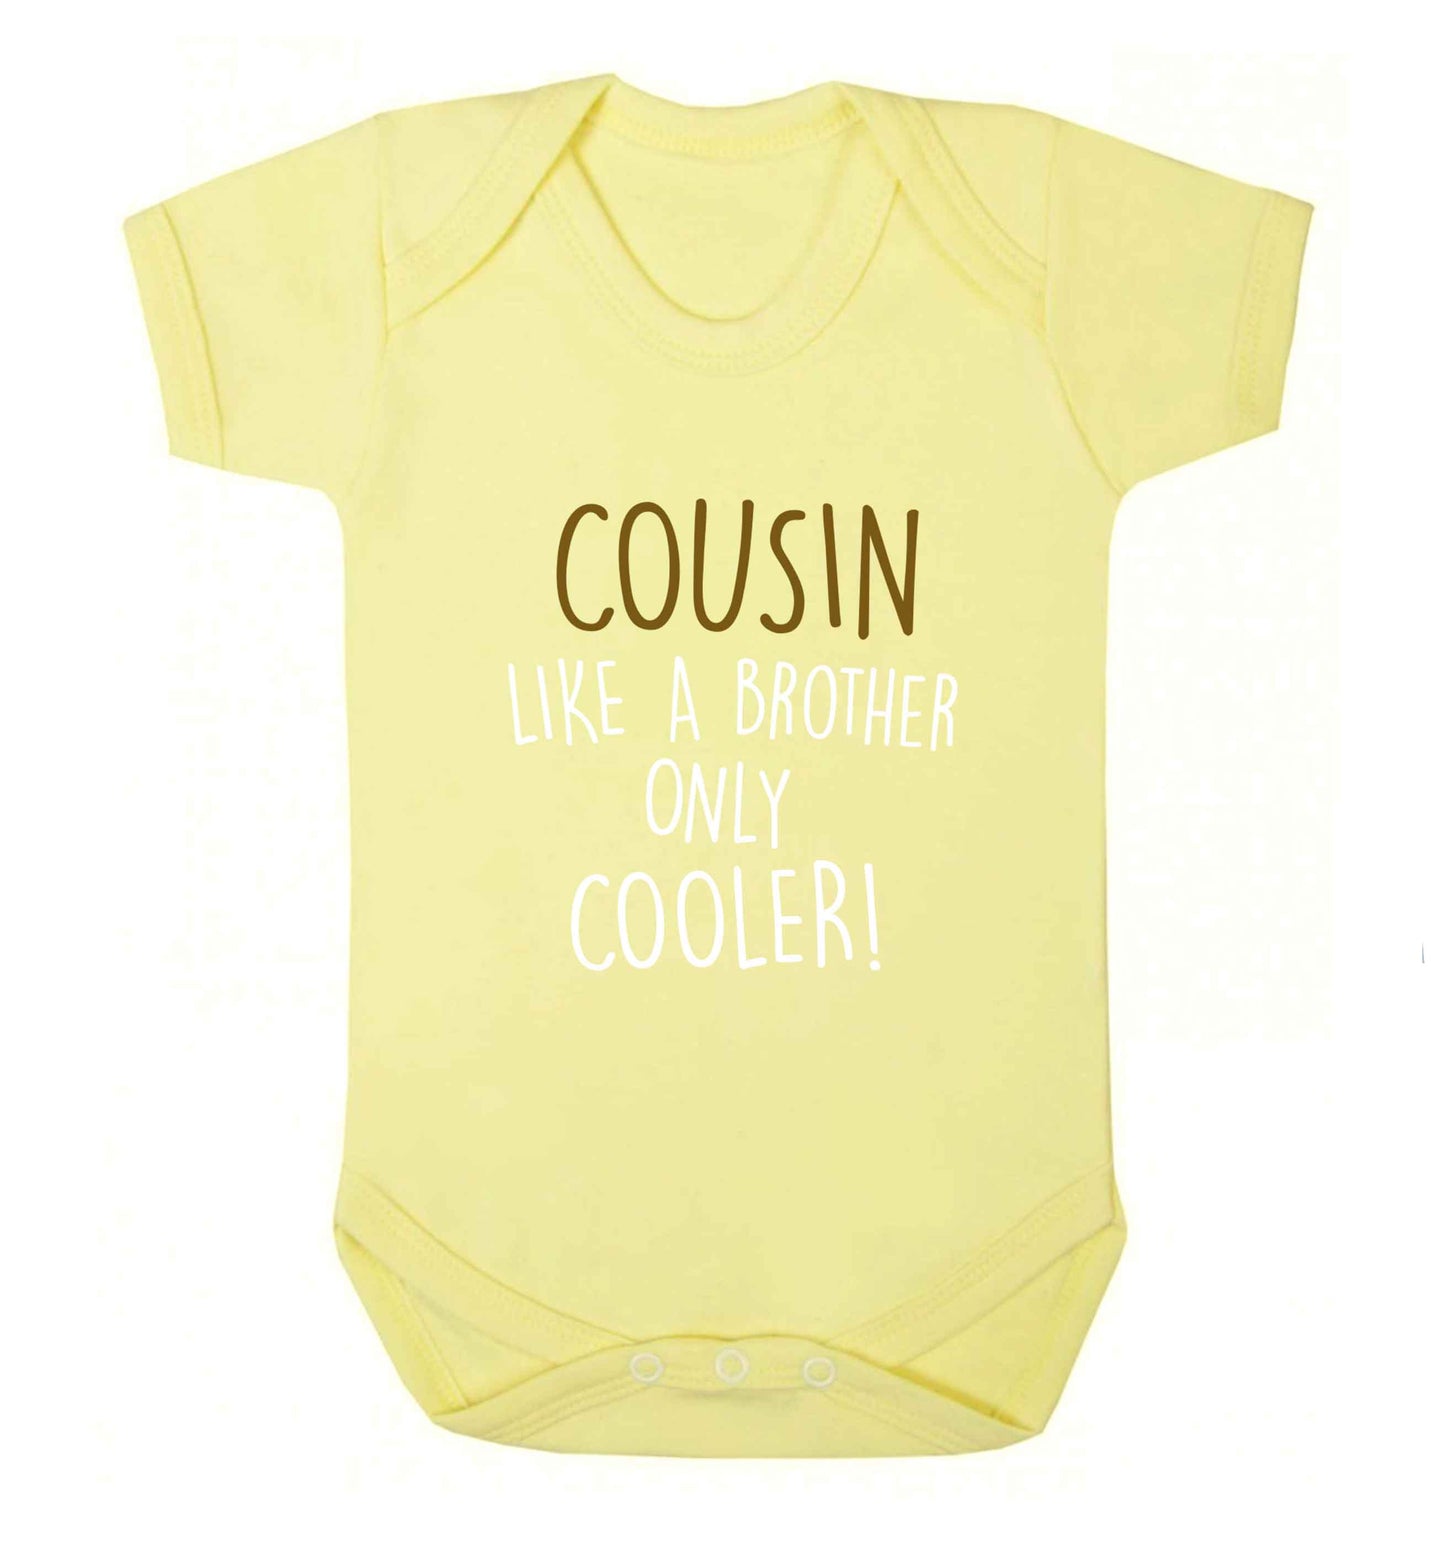 Cousin like a brother only cooler baby vest pale yellow 18-24 months